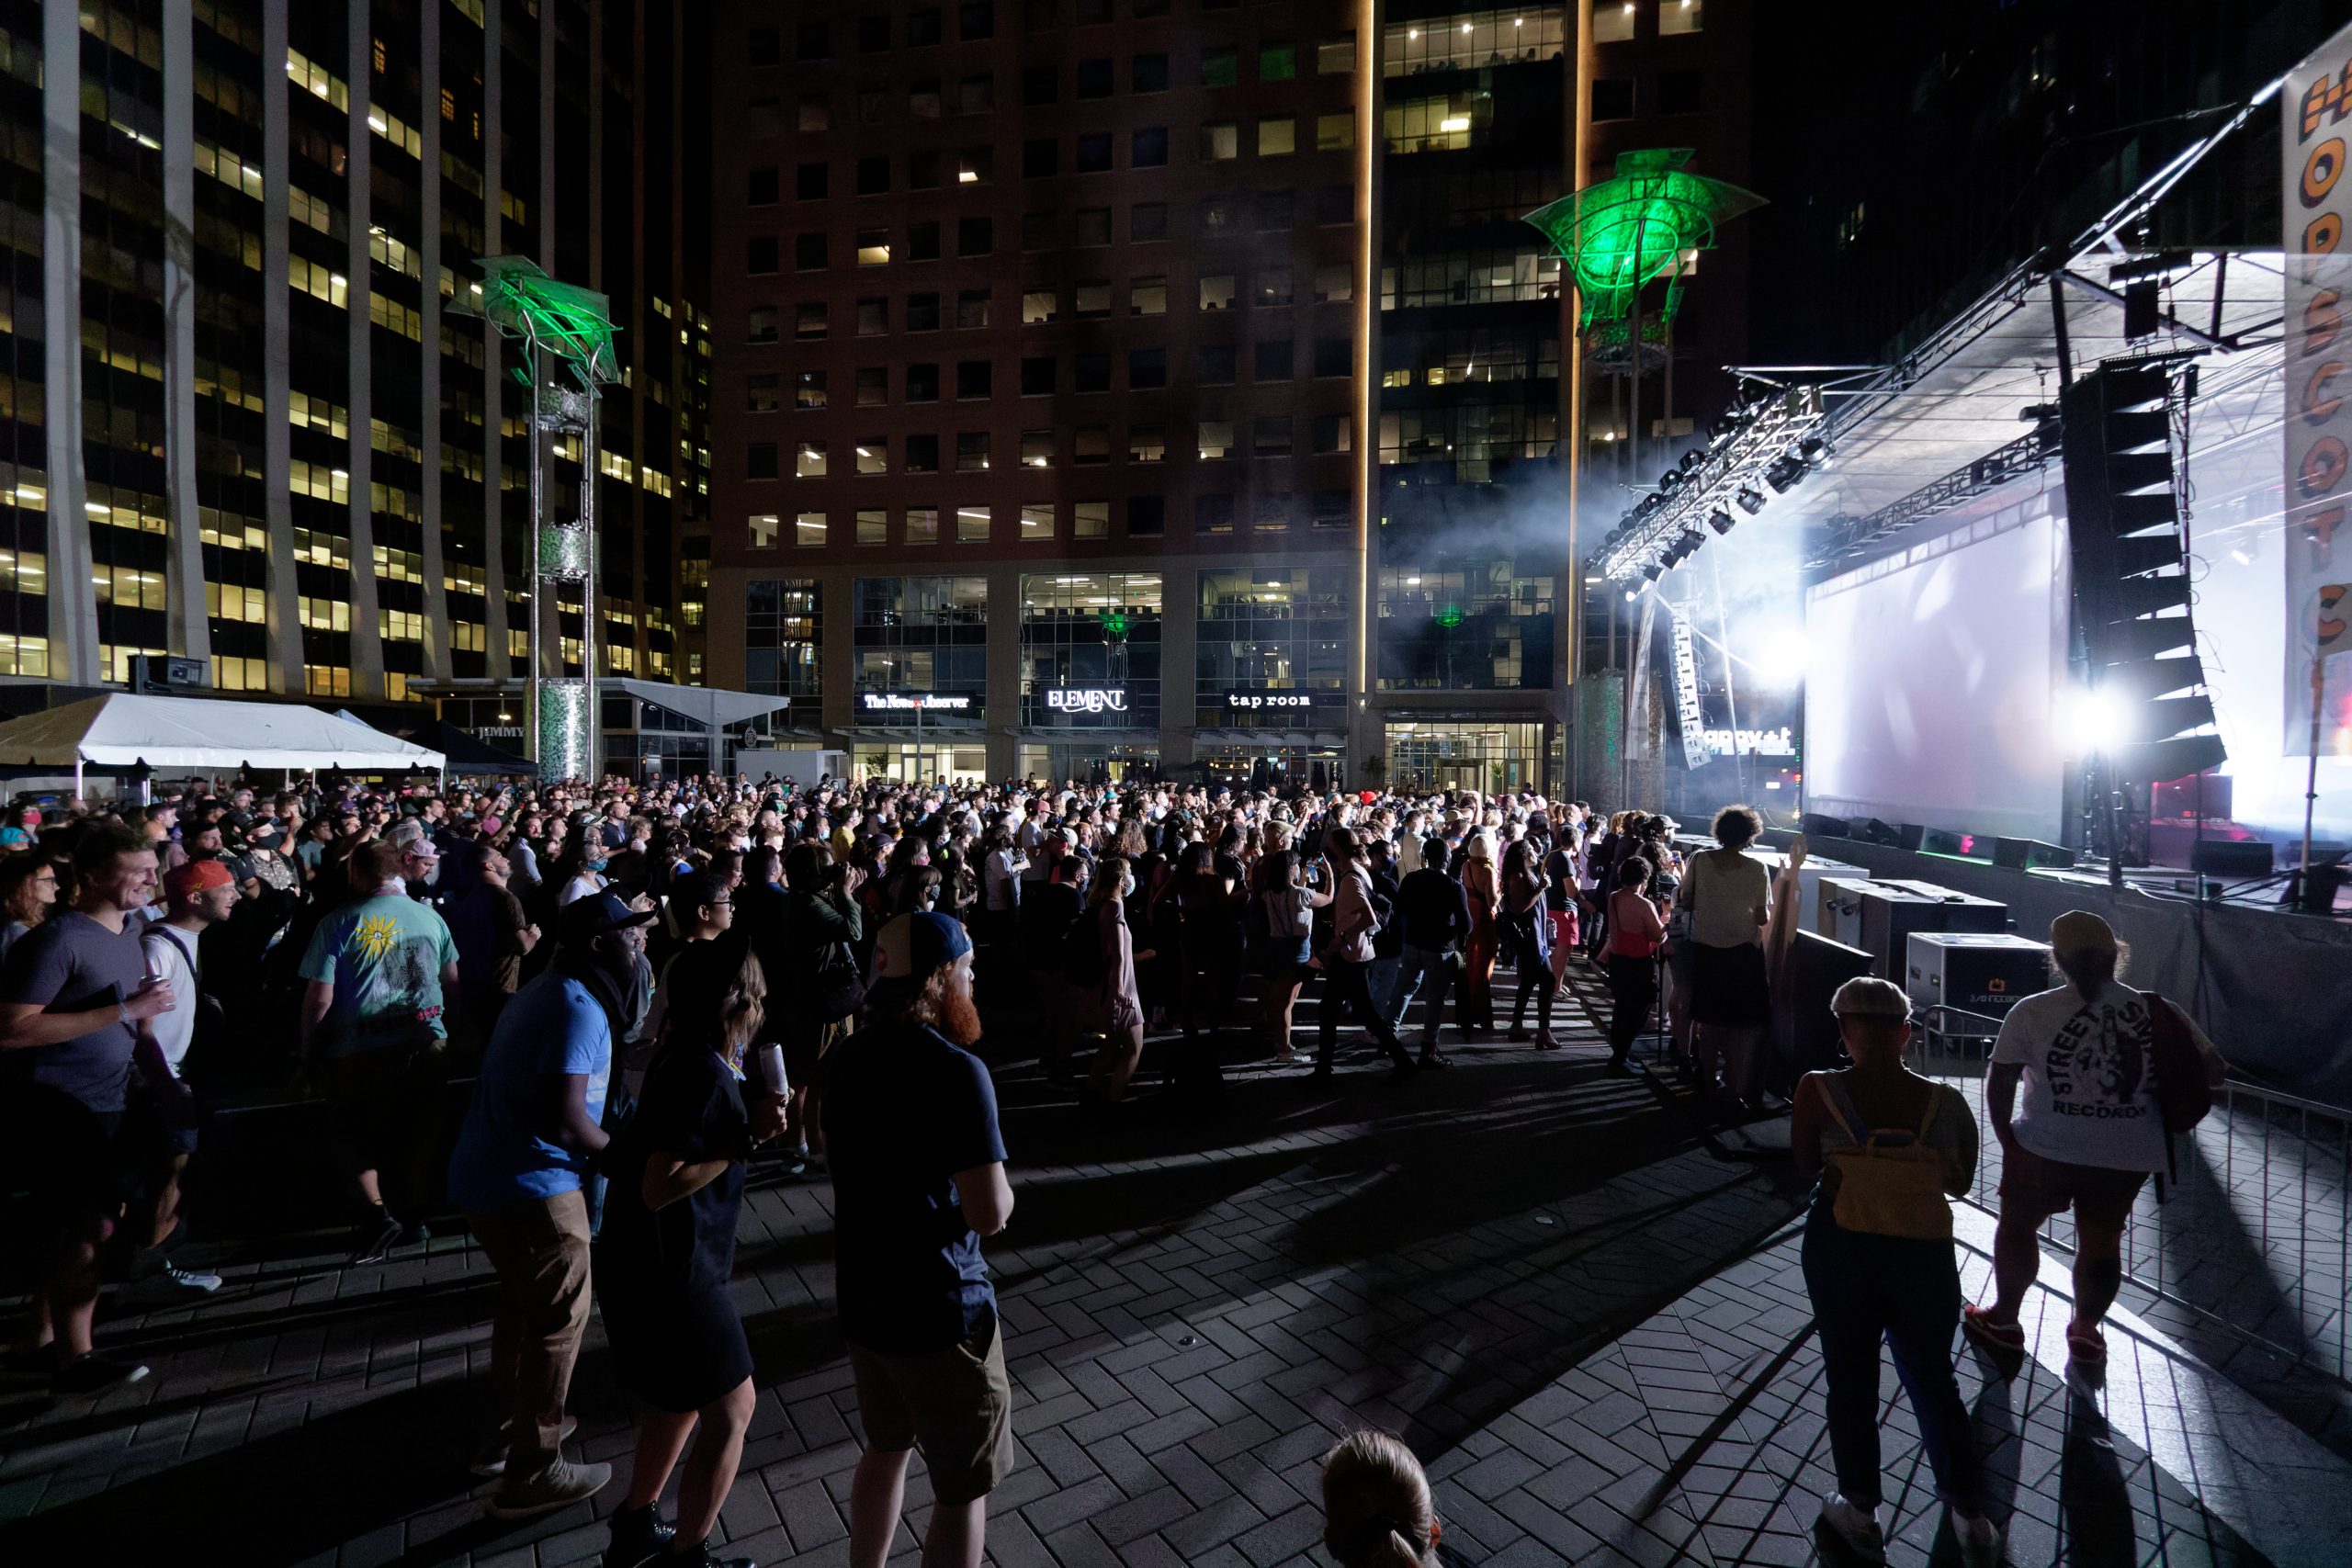 Shot of the crowd watching Flying Lotus at the City Plaza venue
Photo by Ford Bowles